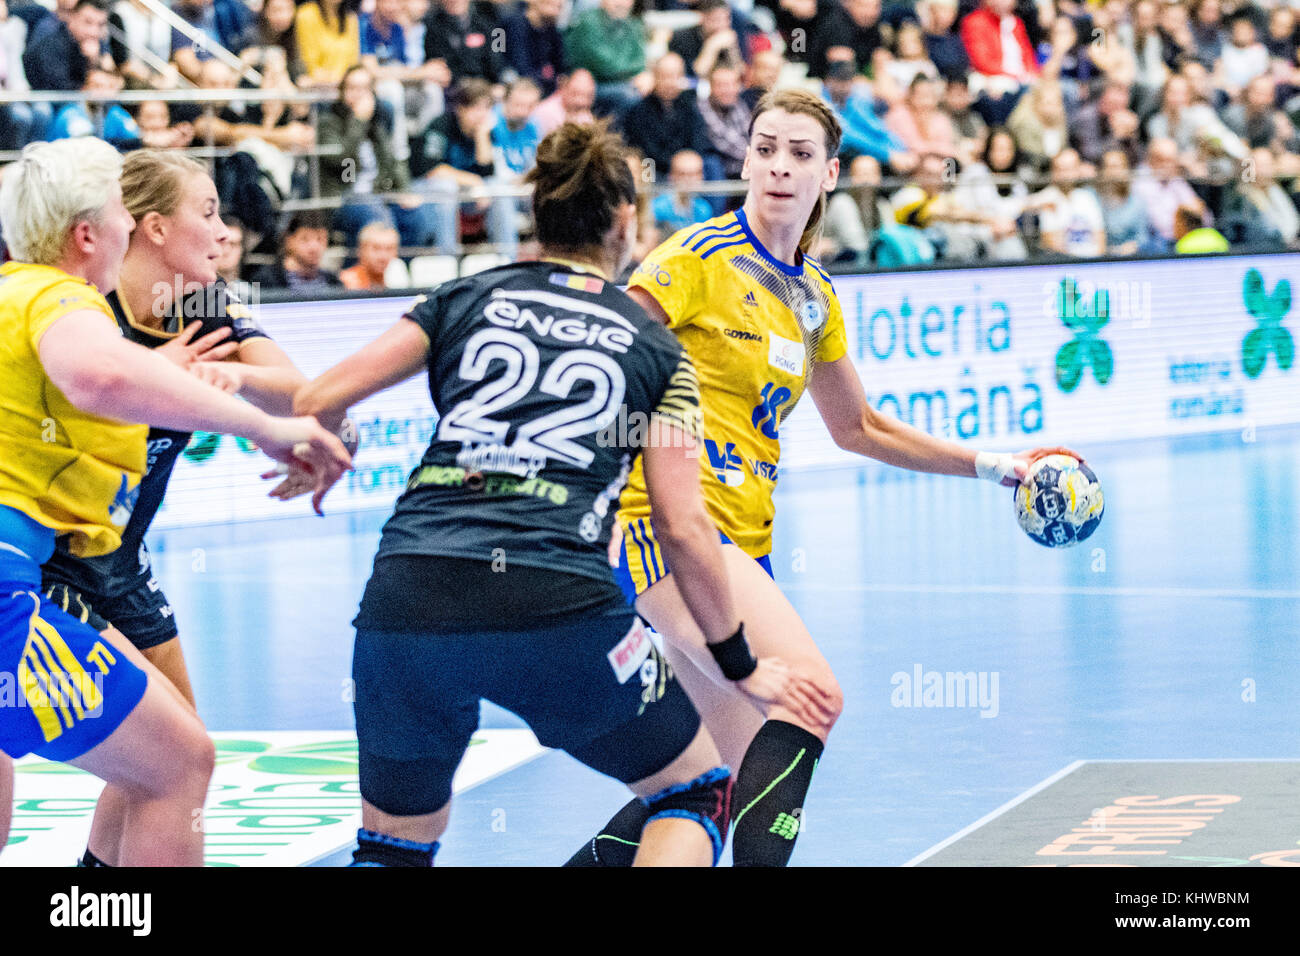 Womans Ehf Handball Champions League High Resolution Stock Photography and  Images - Alamy